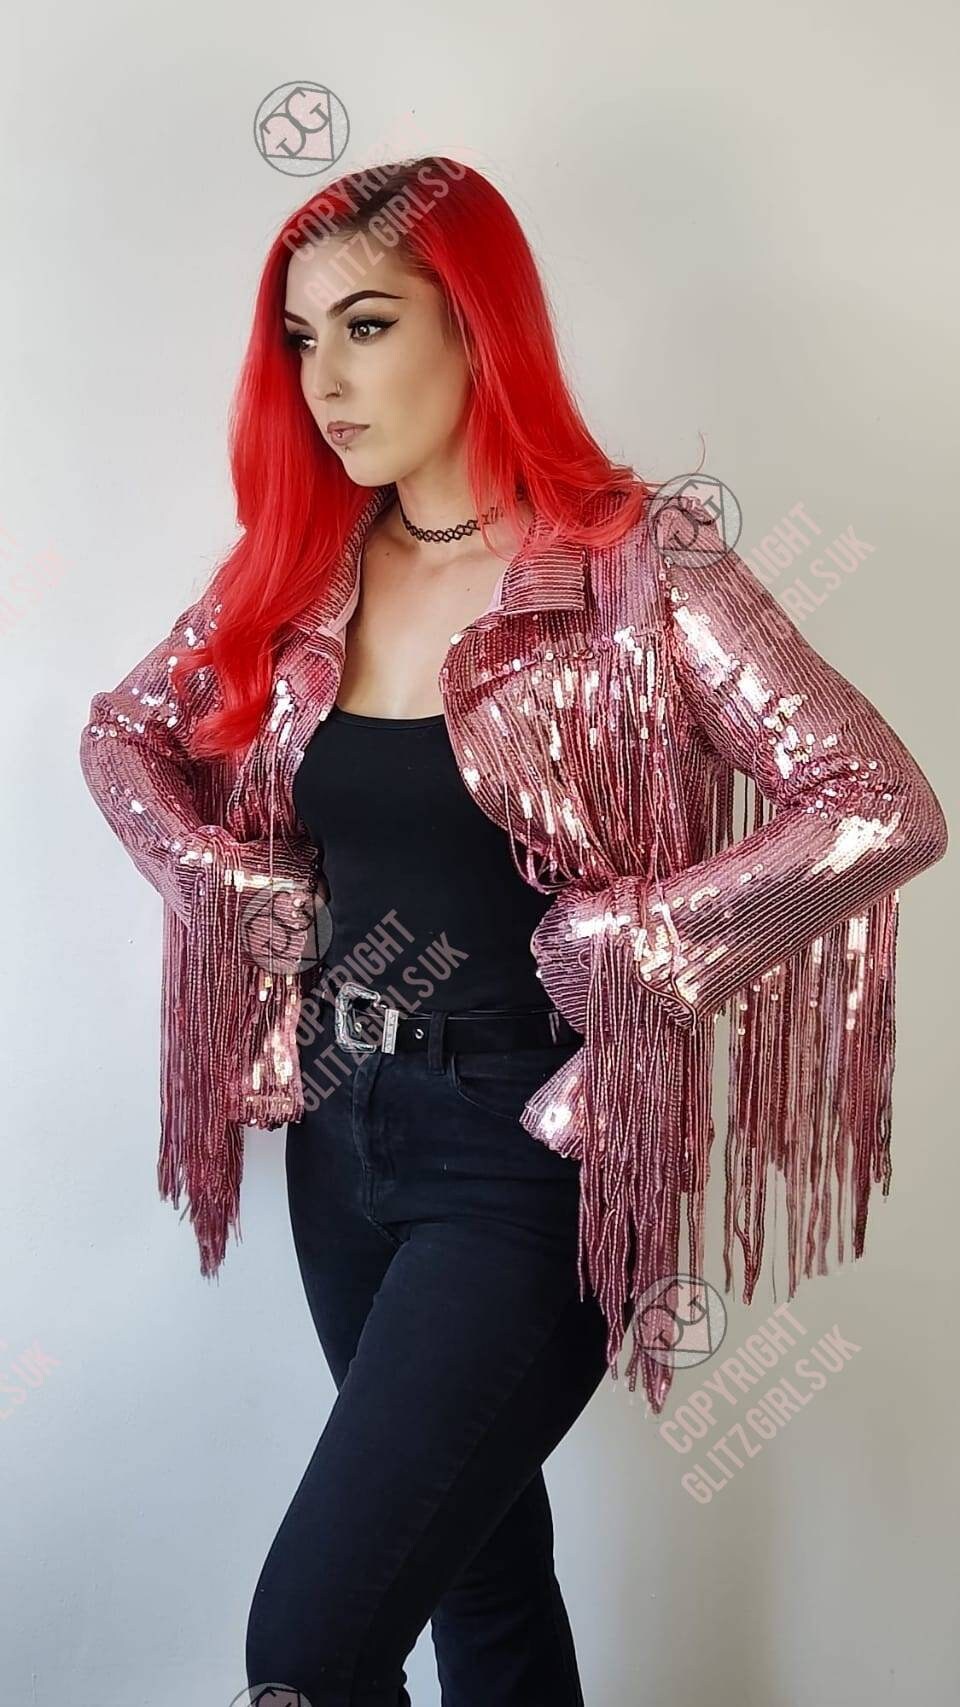 Tinsel Fringe Jacket Sparkly Silver 70s 80s 90s Style Iridescent Festival  Party Rave Outfit Carnival Dance Costume Holographic Glitzy Duster 